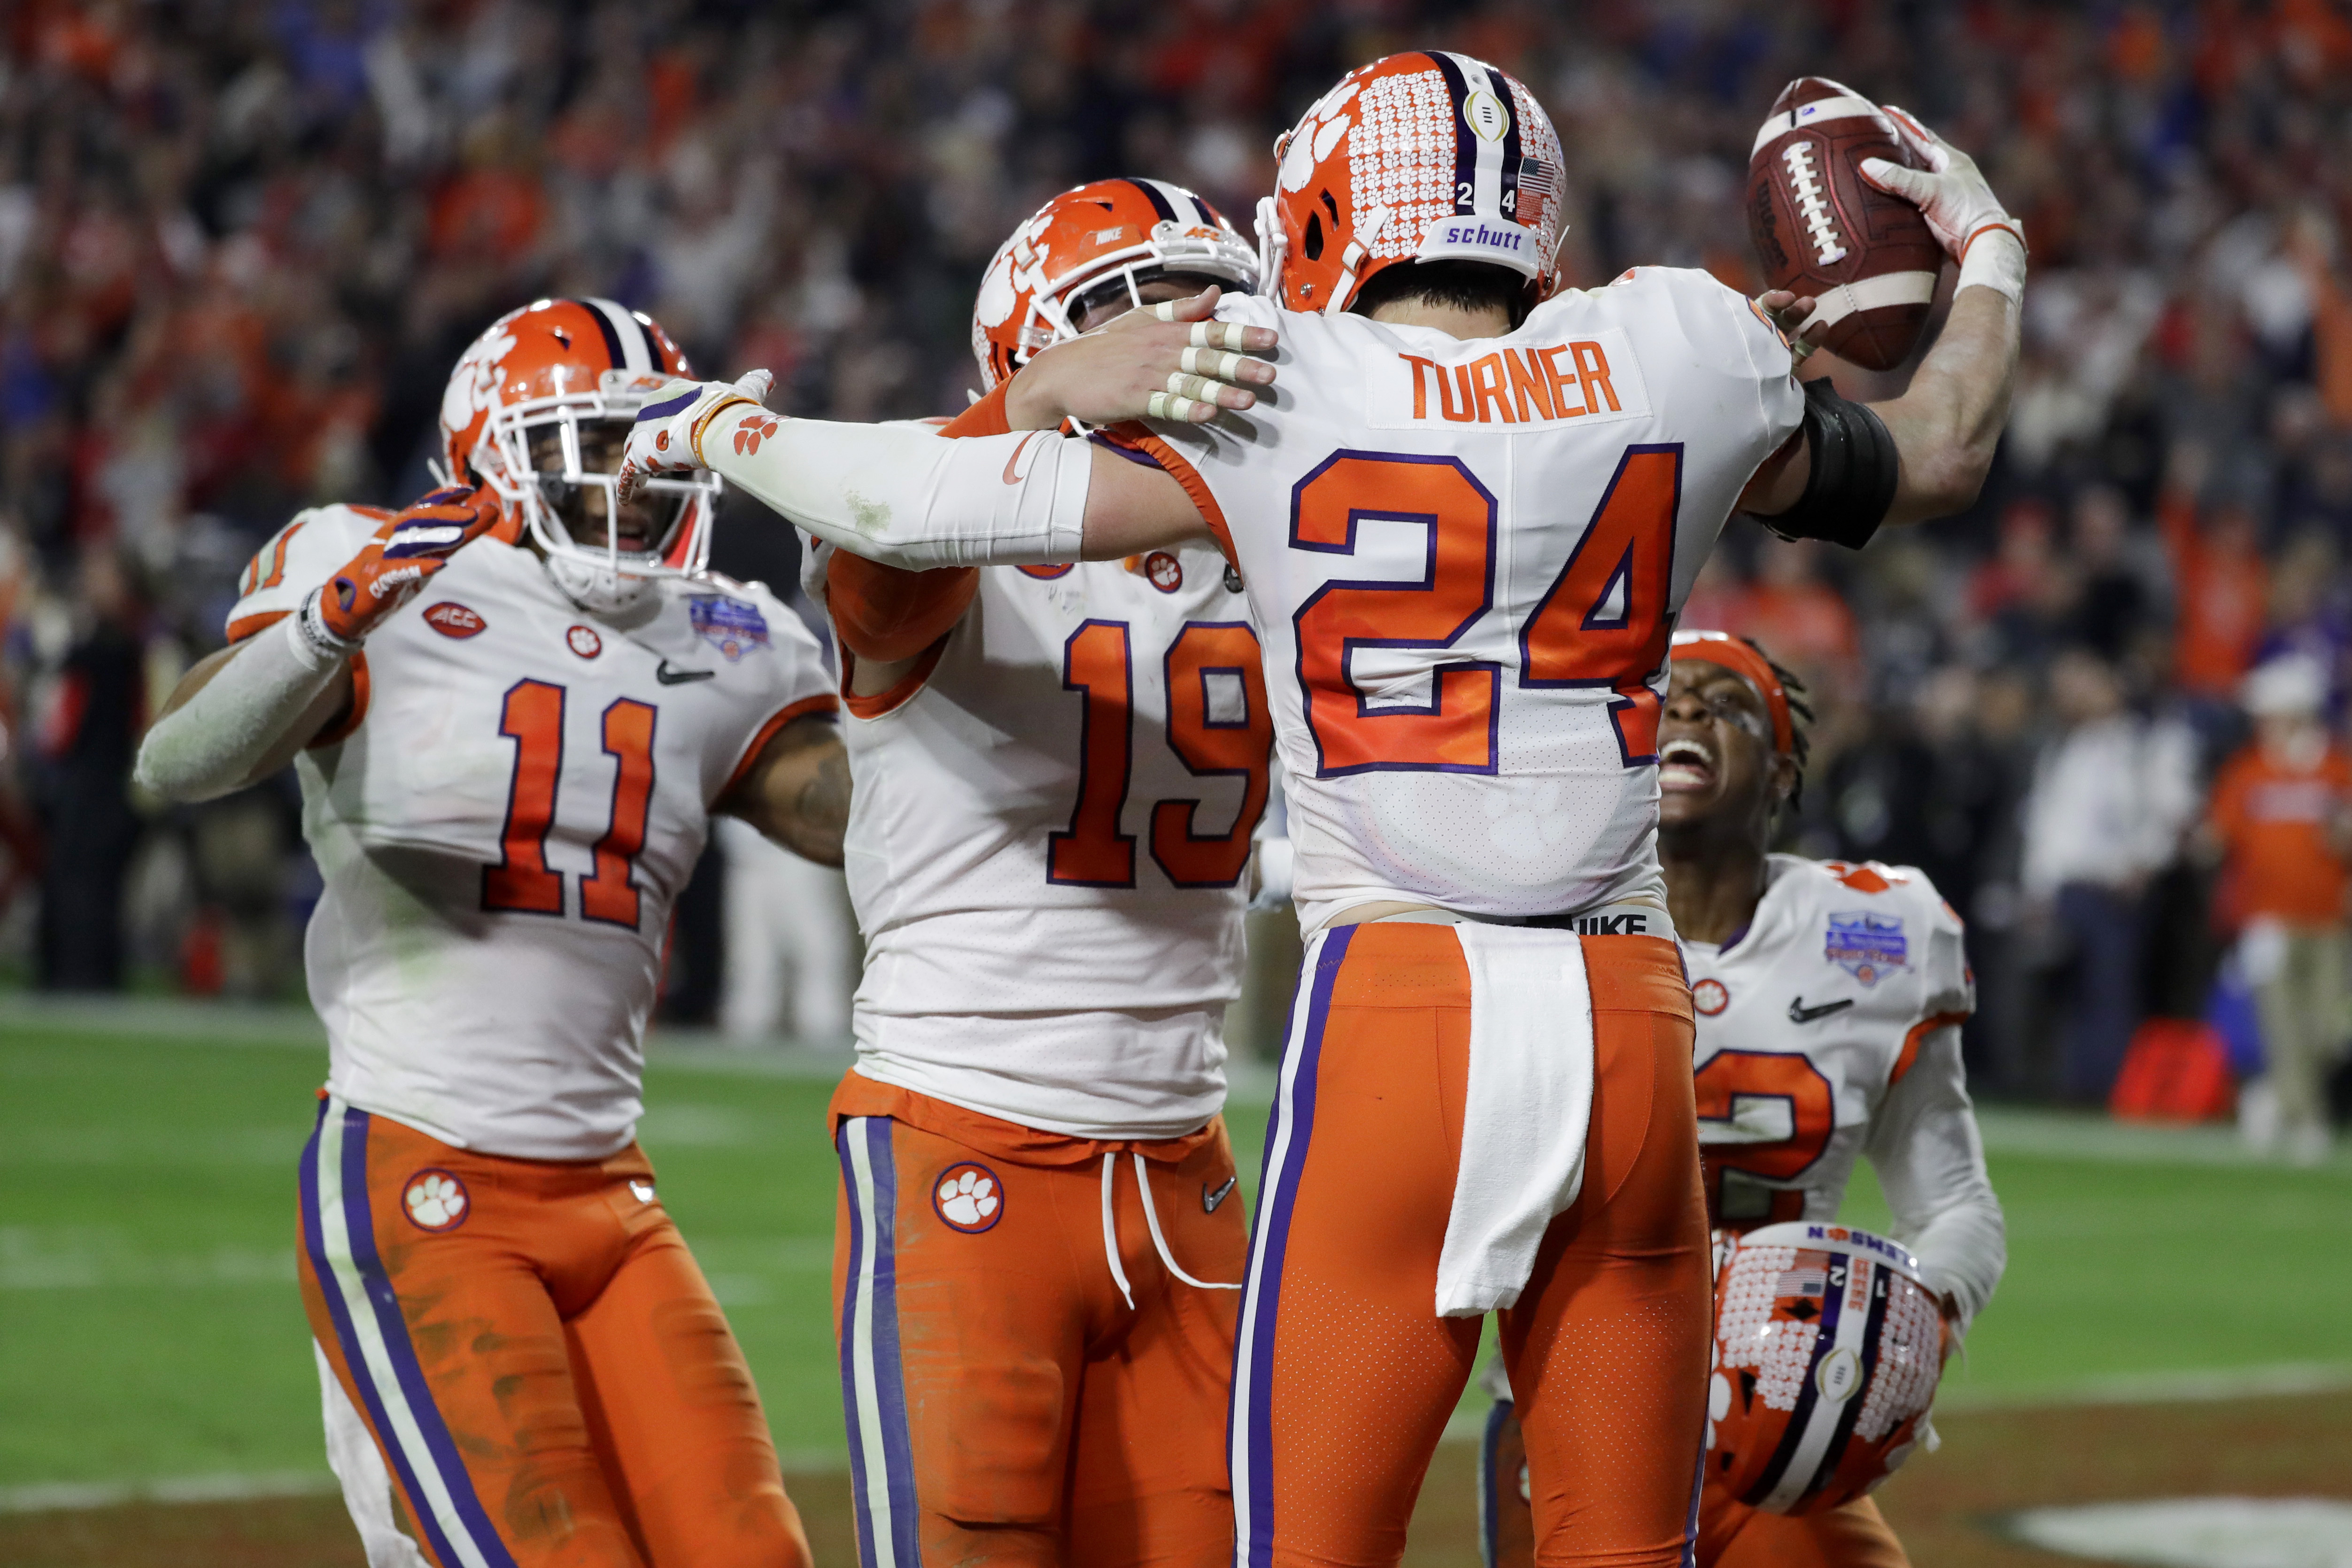 LSU cruises, Clemson survives for title game clash